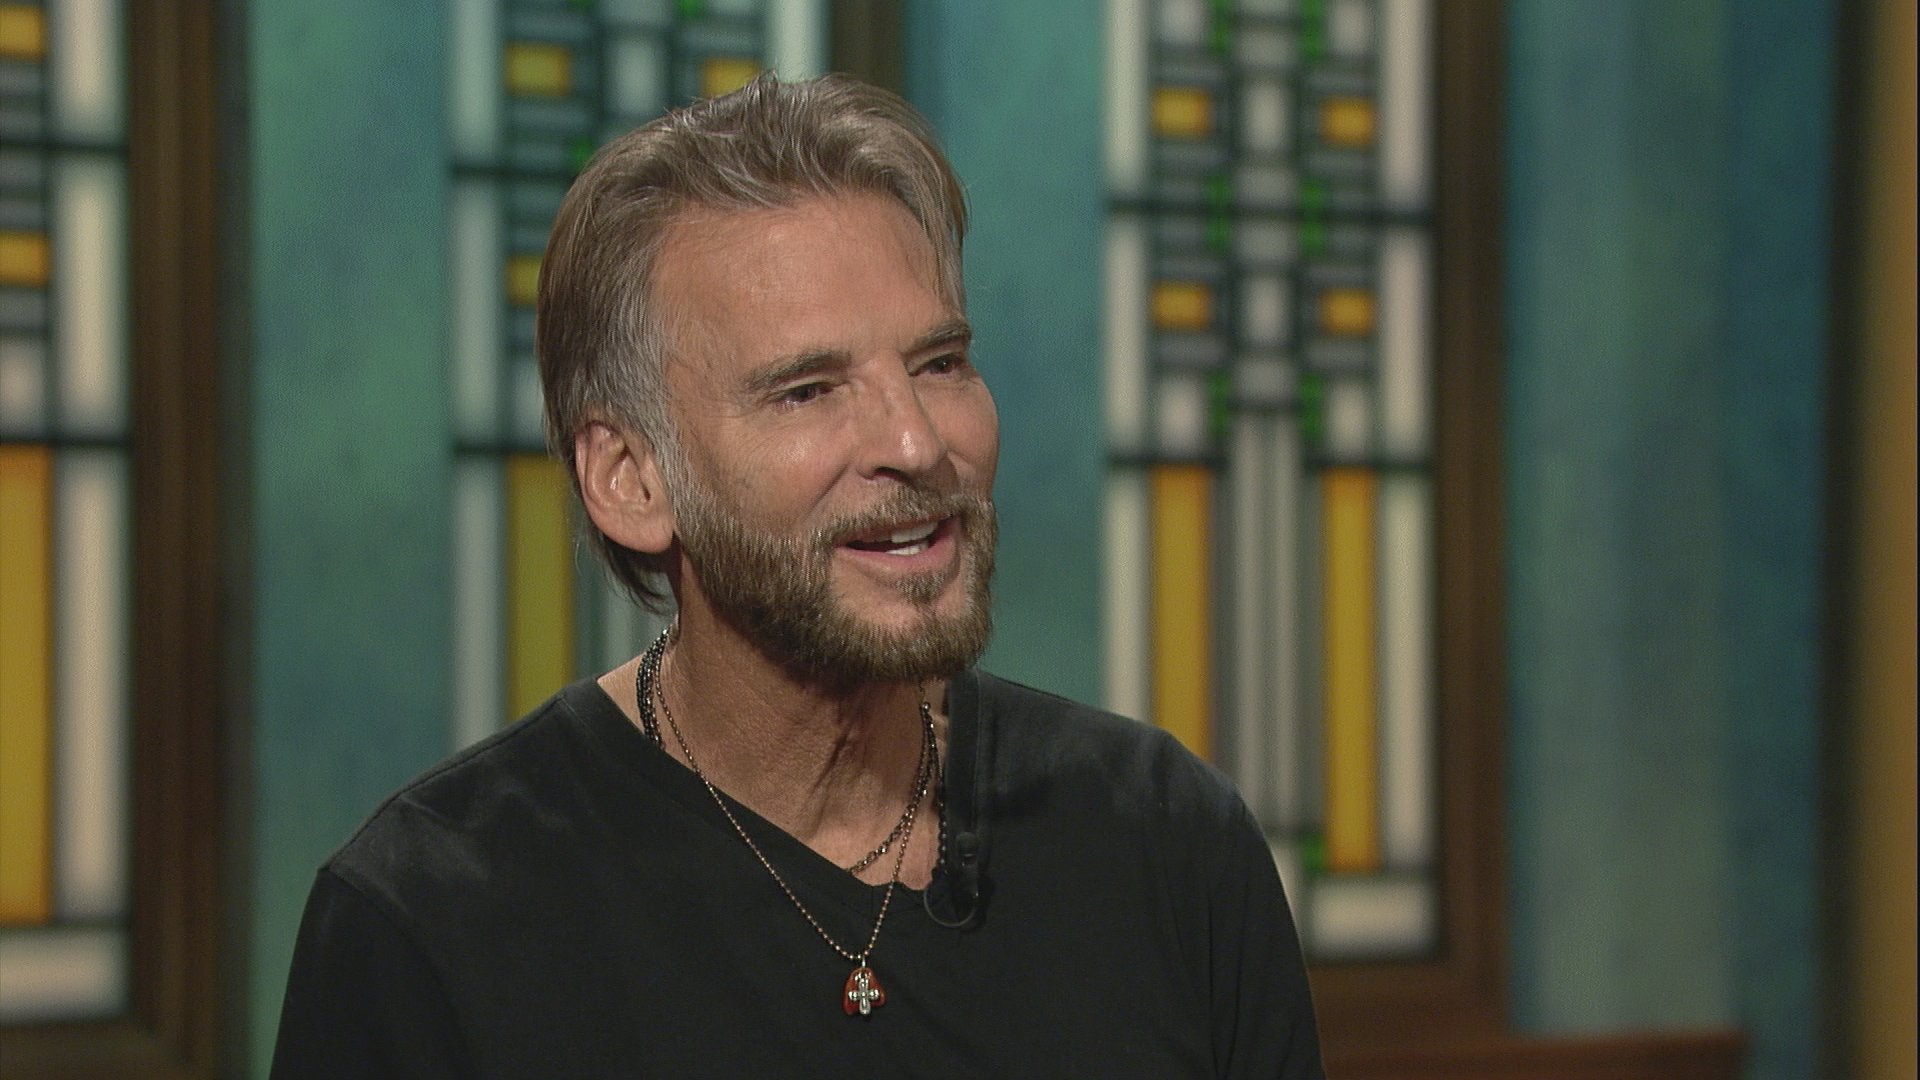 Kenny Loggins on Being a 'Moving Target' Throughout His Career